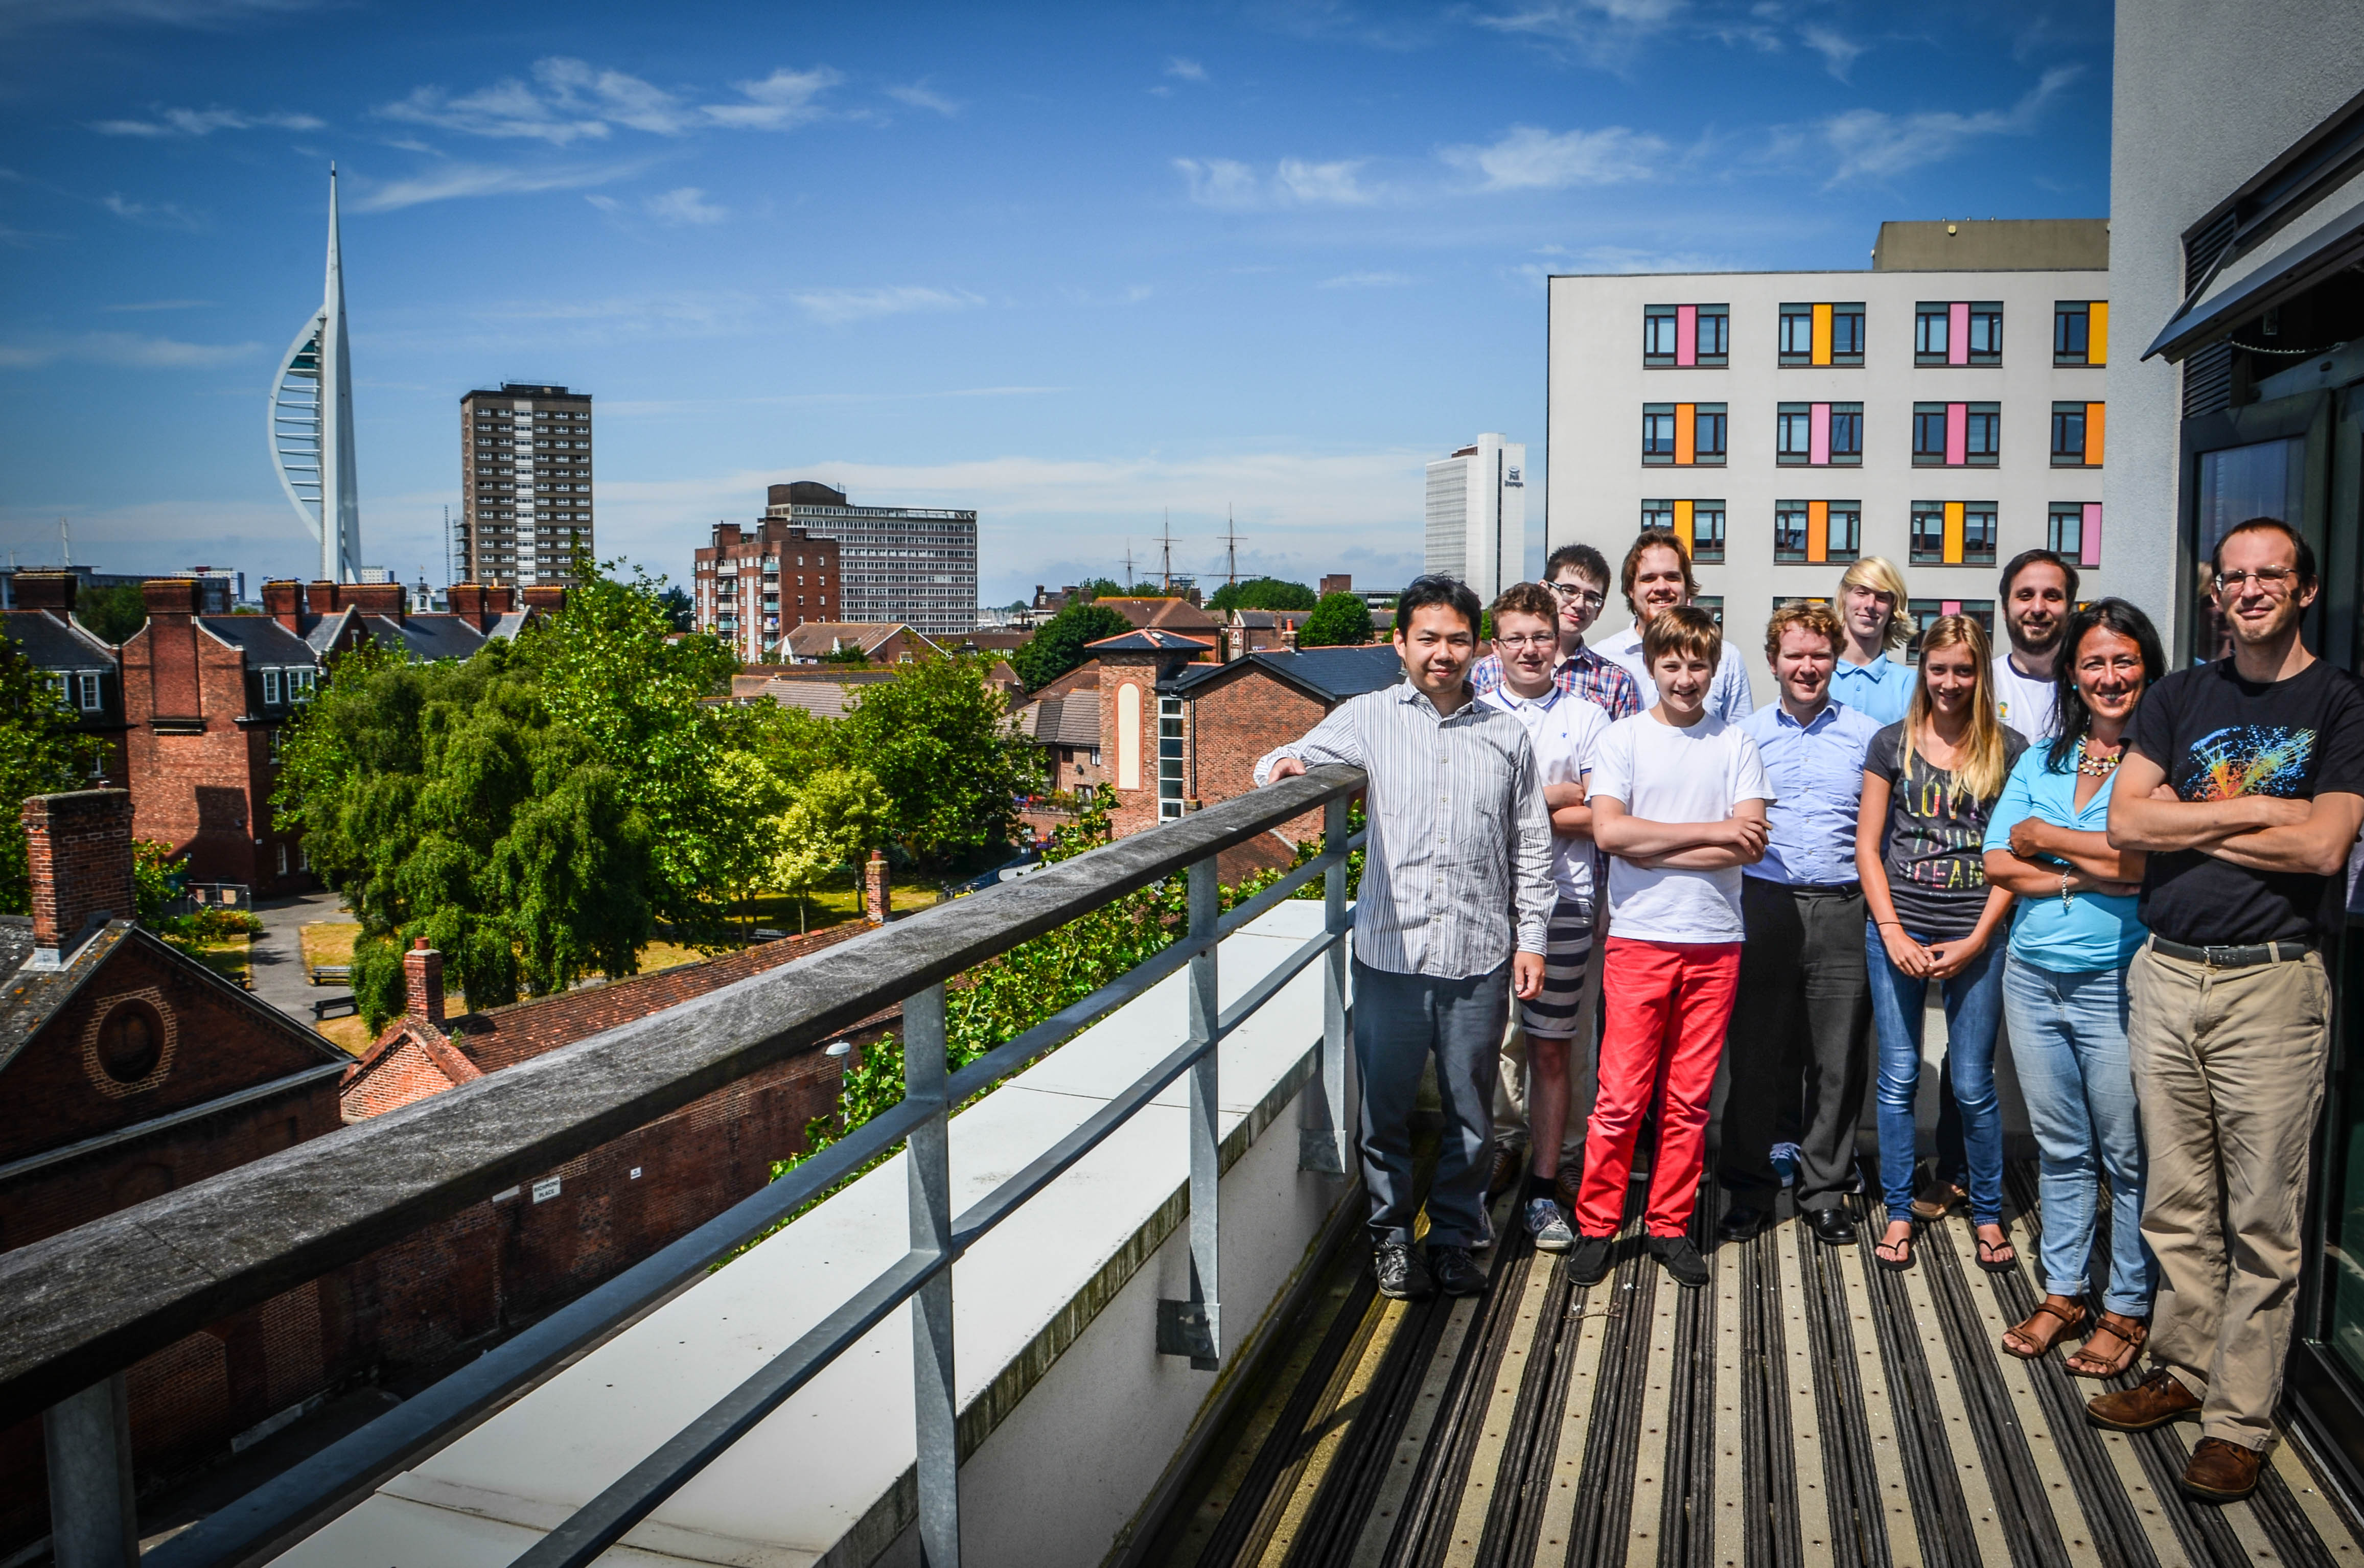 Work experience students in June 2014 with some of their ICG supervisors, on the terrace of our building.